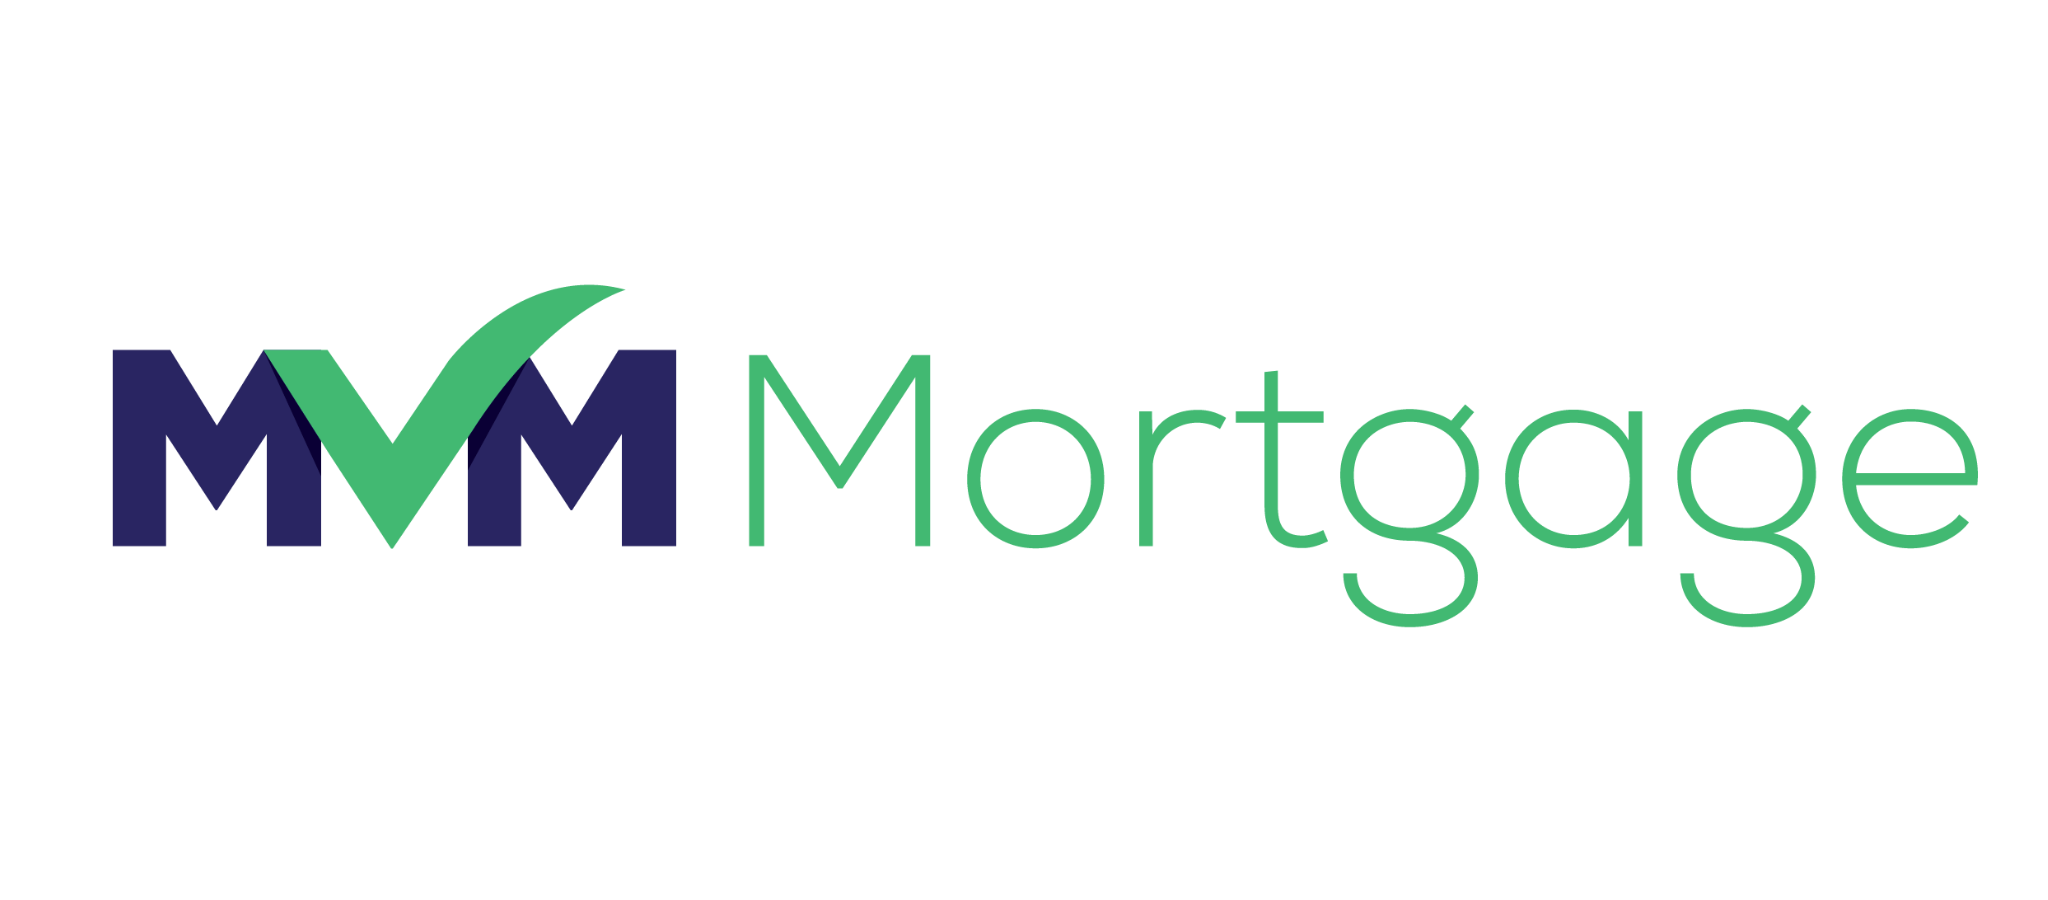 MVM MortgageServices